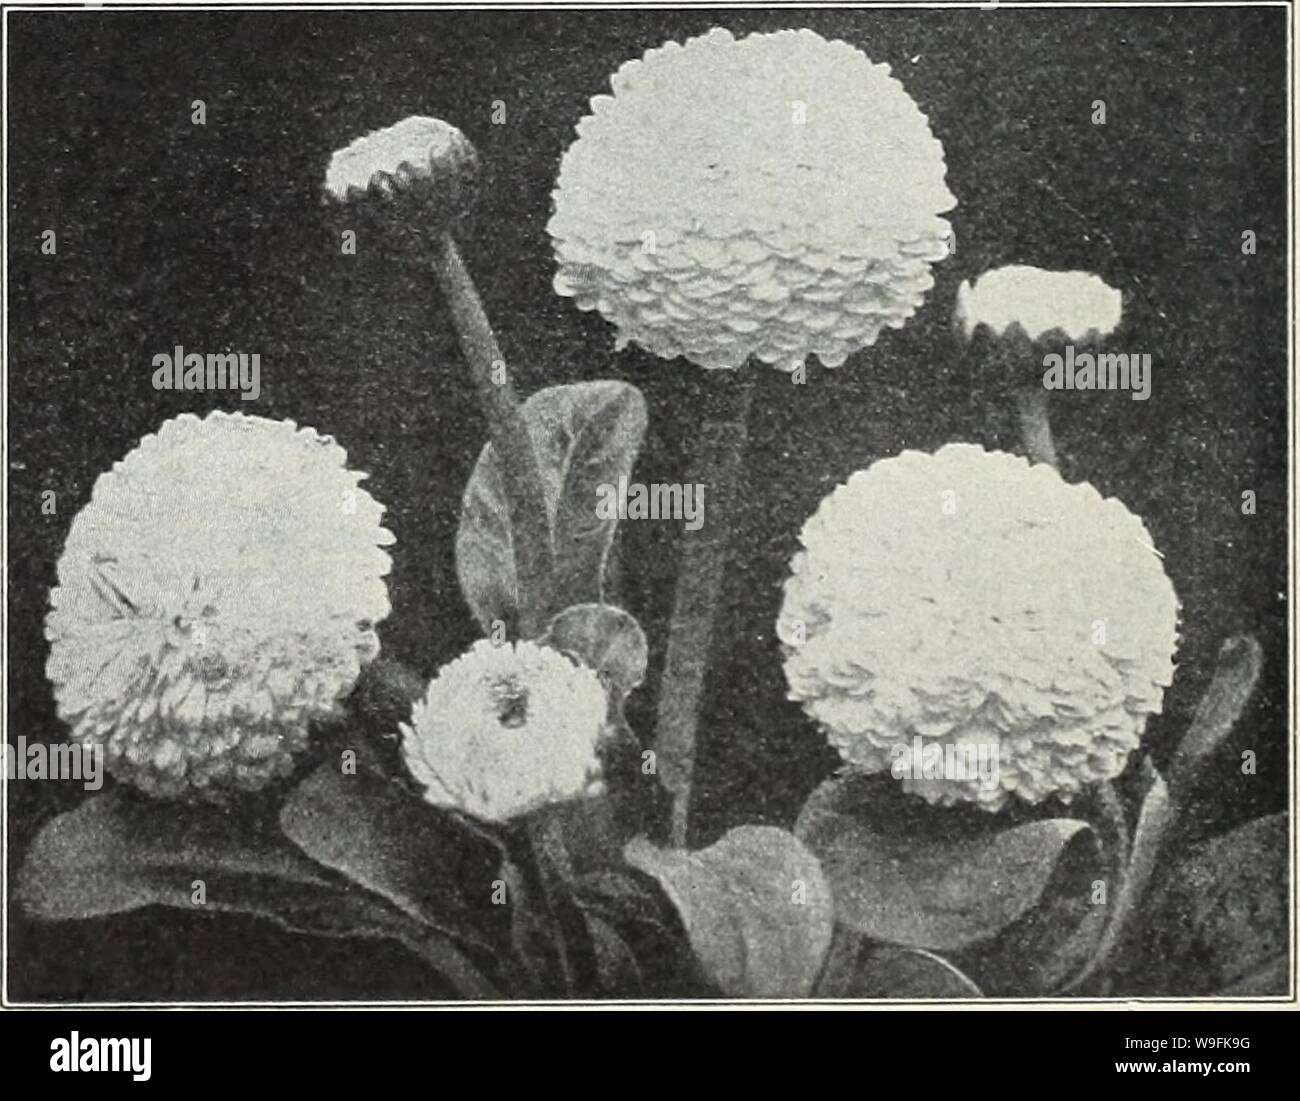 Archive image from page 49 of Currie's garden annual  spring. Currie's garden annual : spring 1934 59th year  curriesgardenann19curr_0 Year: 1934 ( Coreopsis—'Mayfield Giant' CHERIANTHUS ALLIONI (Siberian Wallflower) an annual having bright lendid rock plant. Seeds Pkt. 10c DIELYTRA or DICENTRA (Bleeding Heart) SPECTABILIS—An old-time favorite, with long racemes of pink heart shaped flowers. Plants, price, each, 50c; per dozen, S5.00. EXIMA—Bear compound racemes of deep rose flowers. Plants, price, each, 35c; per dozen, S4.00. HARDY GARDEN CHRYSANTHEMUMS ALASKA (Shasta Daisy)—Bears single pure Stock Photo